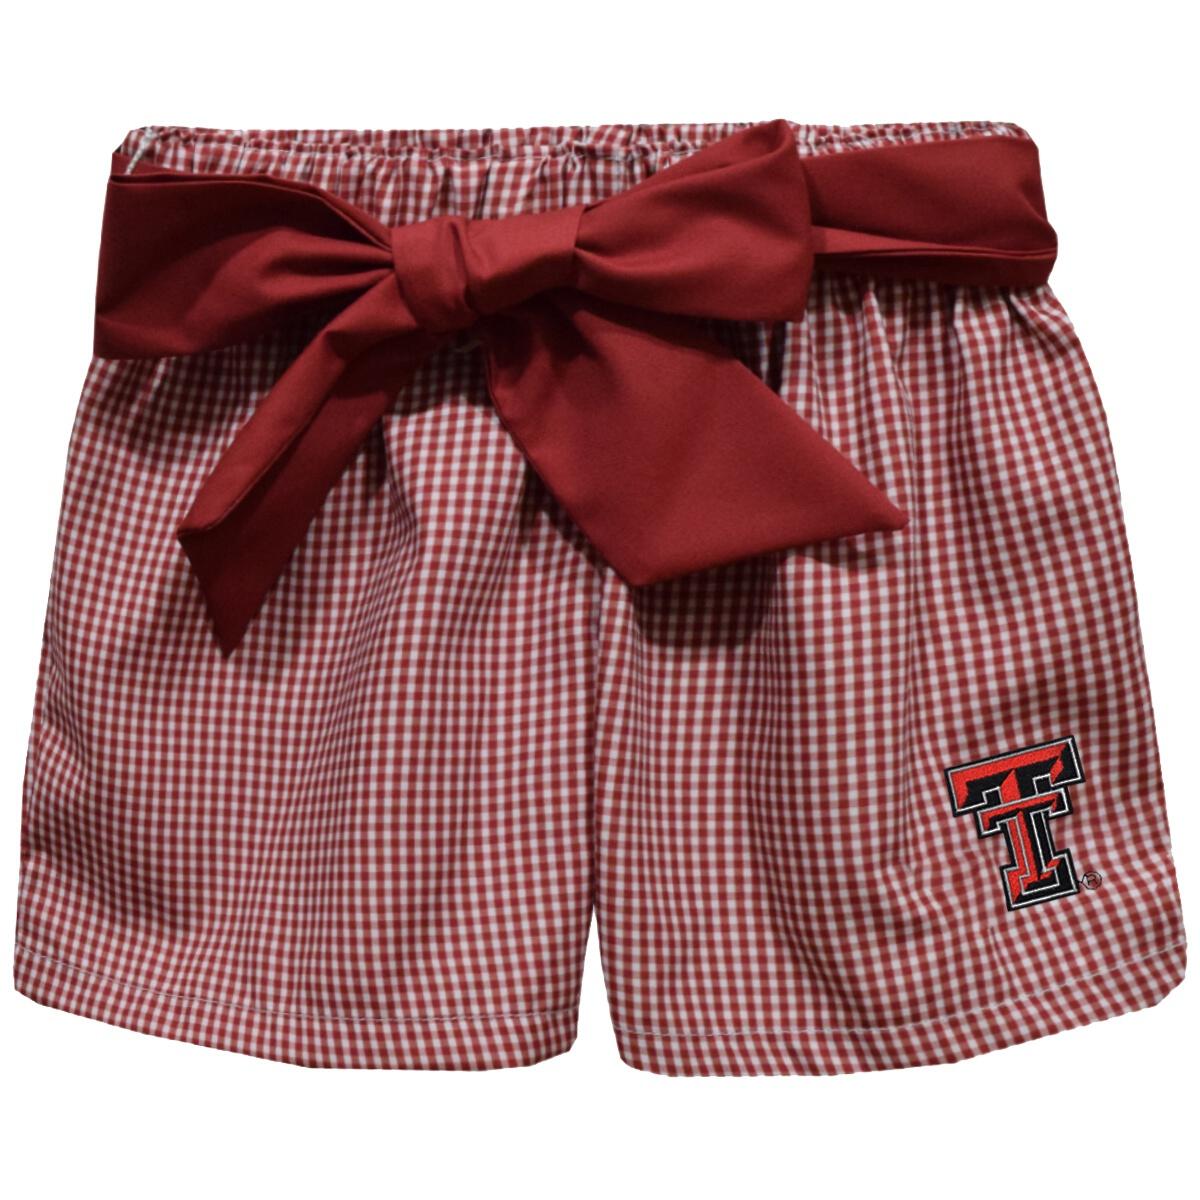 Texas Tech Red Raiders Embroidered Gingham Girls Short With Sash